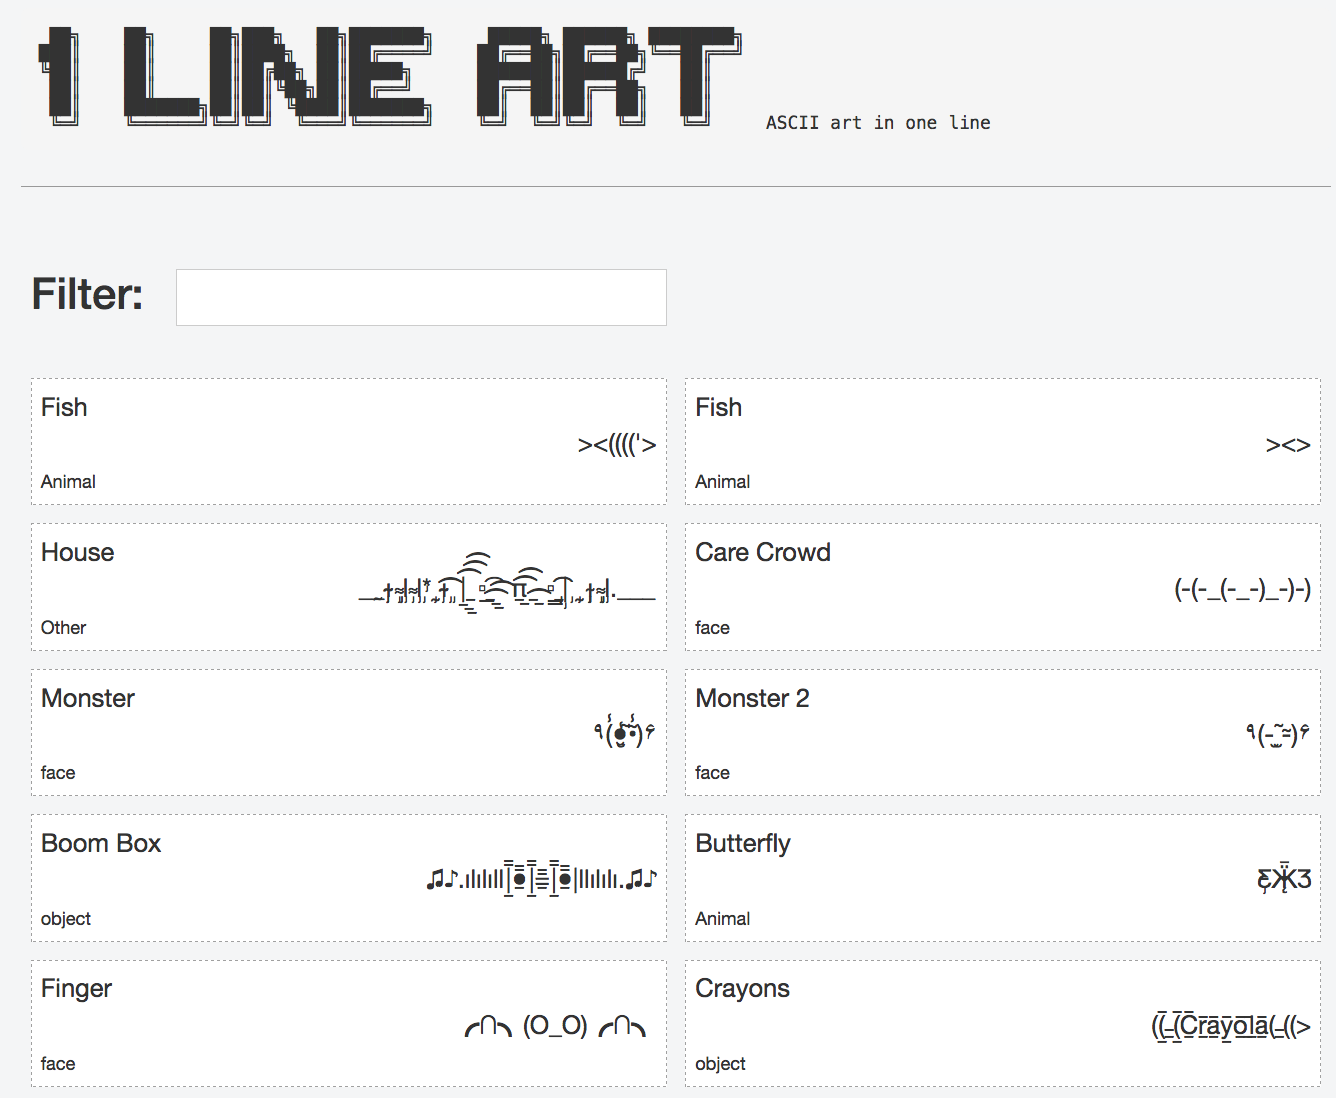 http://1lineart.kulaone.com - click to launch in a new window